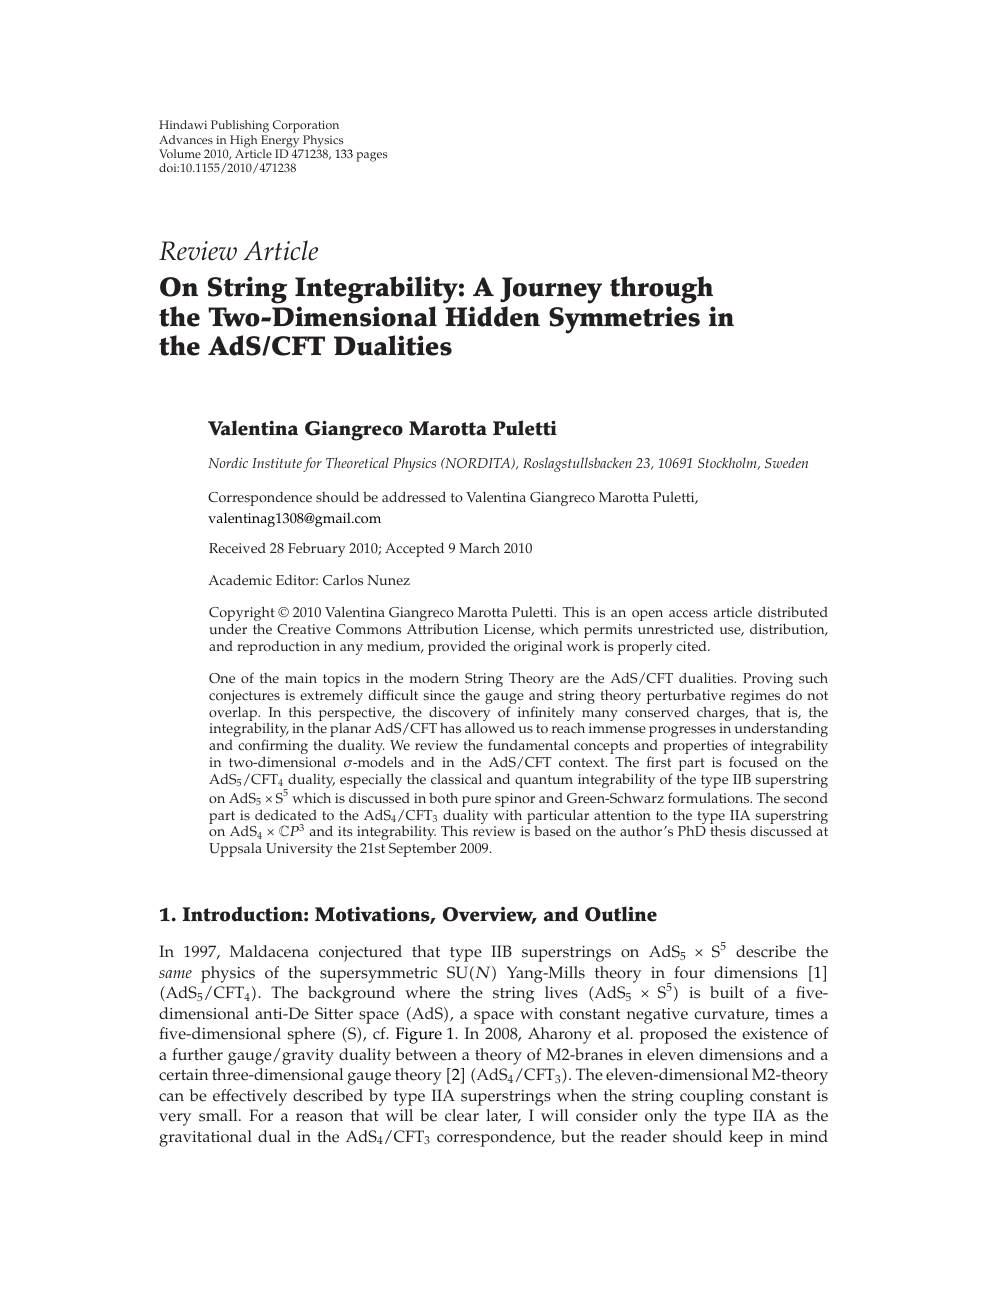 On String Integrability A Journey Through The Two Dimensional Hidden Symmetries In The Ads Cft Dualities Topic Of Research Paper In Physical Sciences Download Scholarly Article Pdf And Read For Free On Cyberleninka